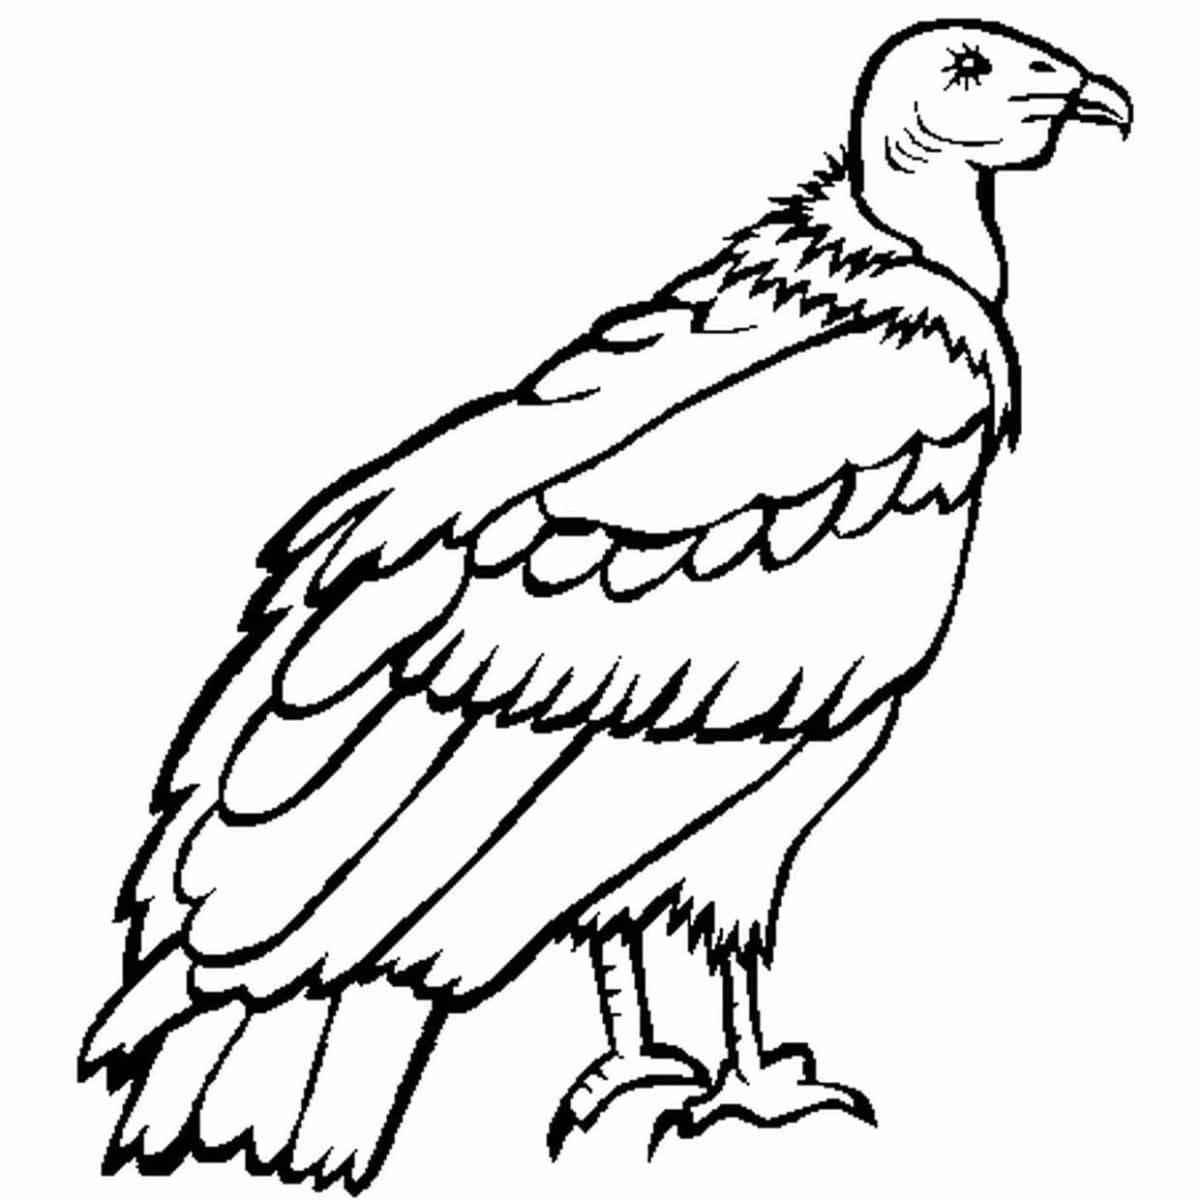 Outstanding vulture coloring page